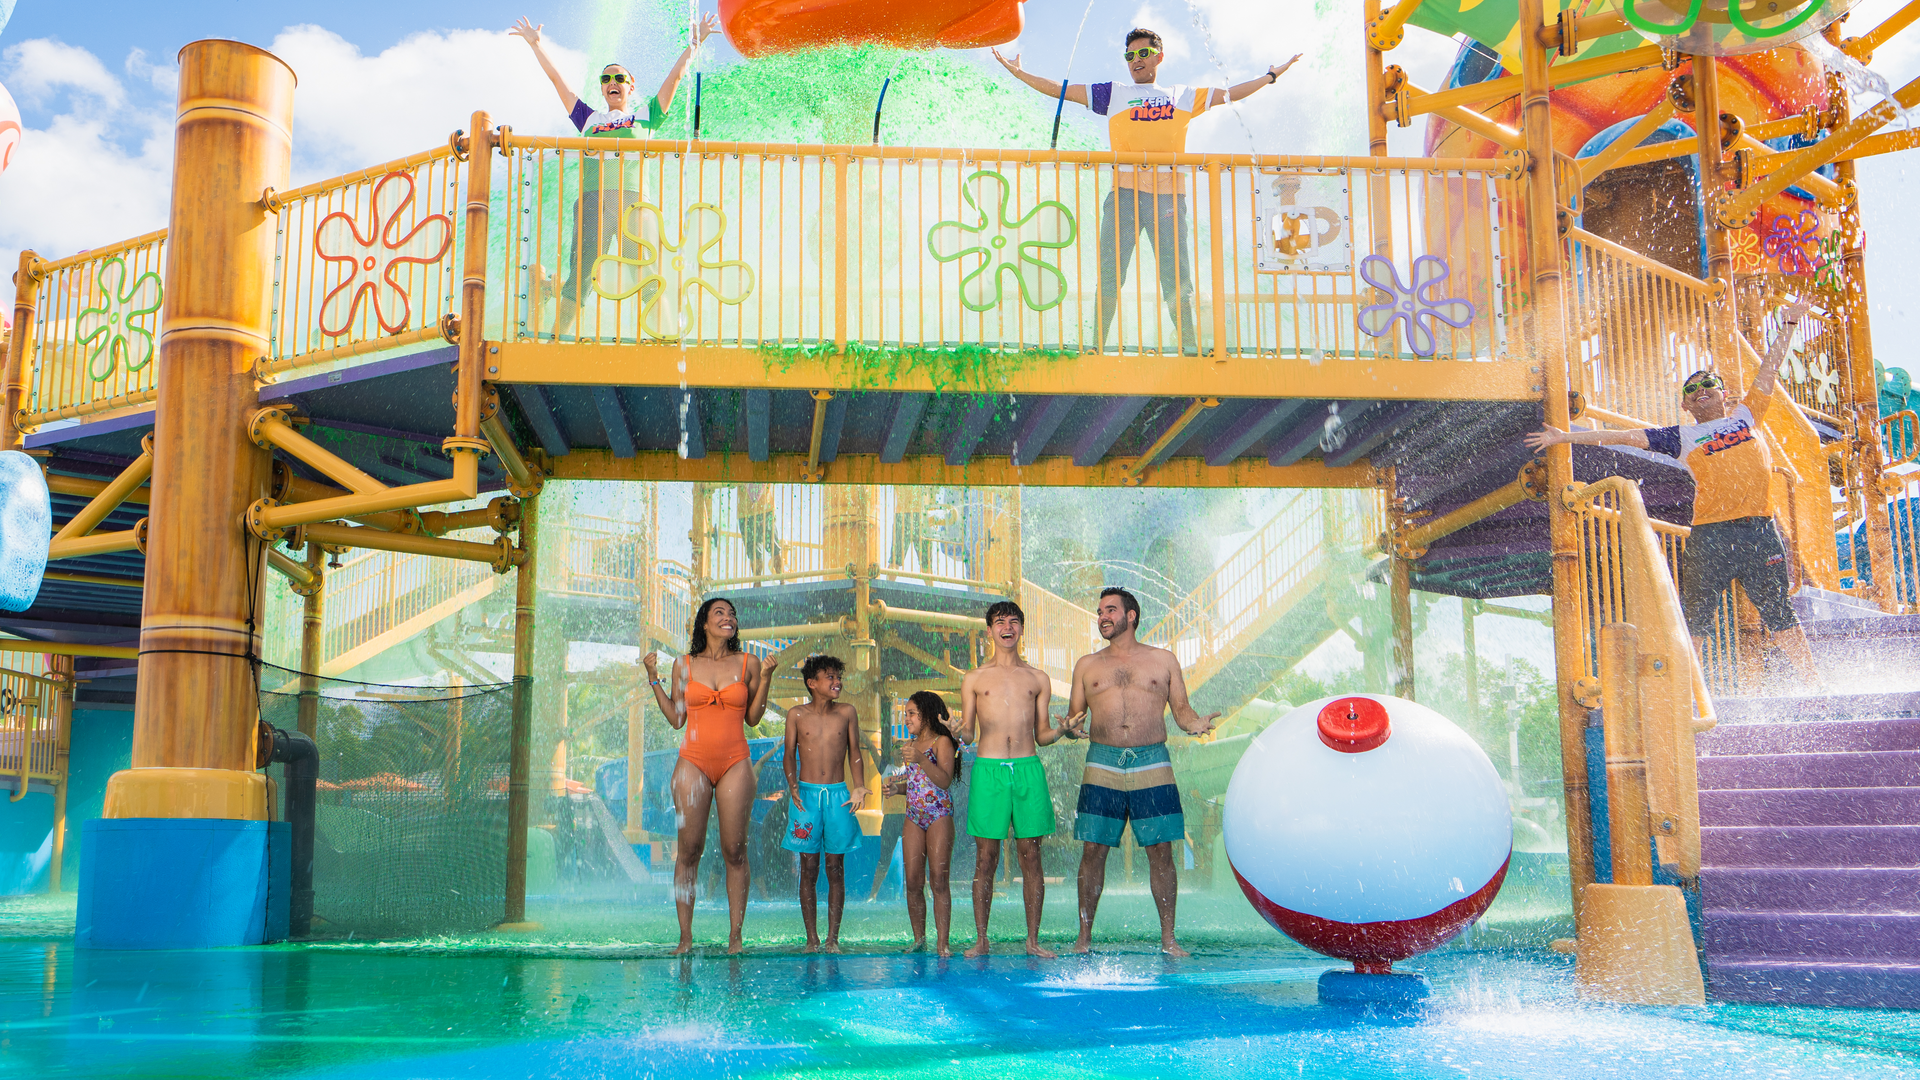 A Group Of People Standing On A Water Slide